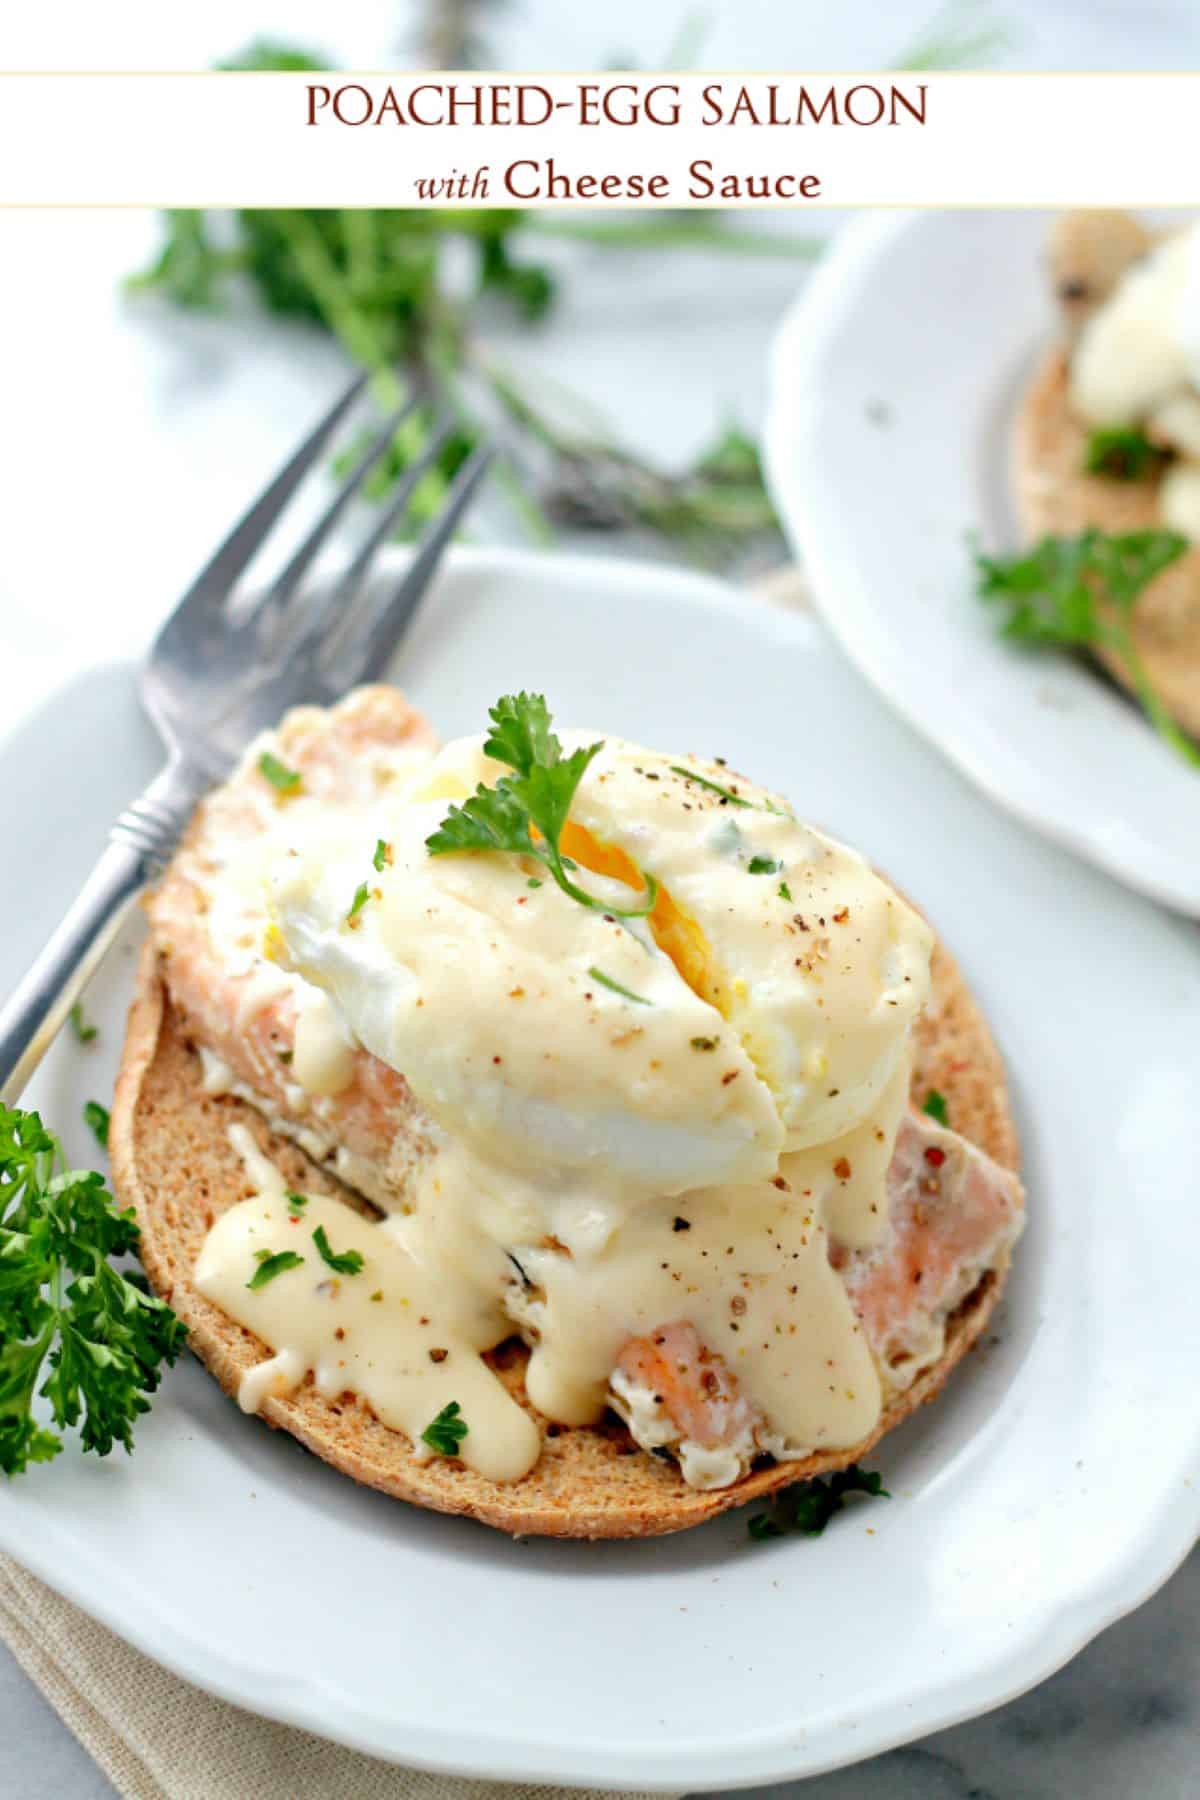 A fillet of salmon topped with a poached egg, cheese sauce, a sprinkling of pepper, and a sprig of parsley.